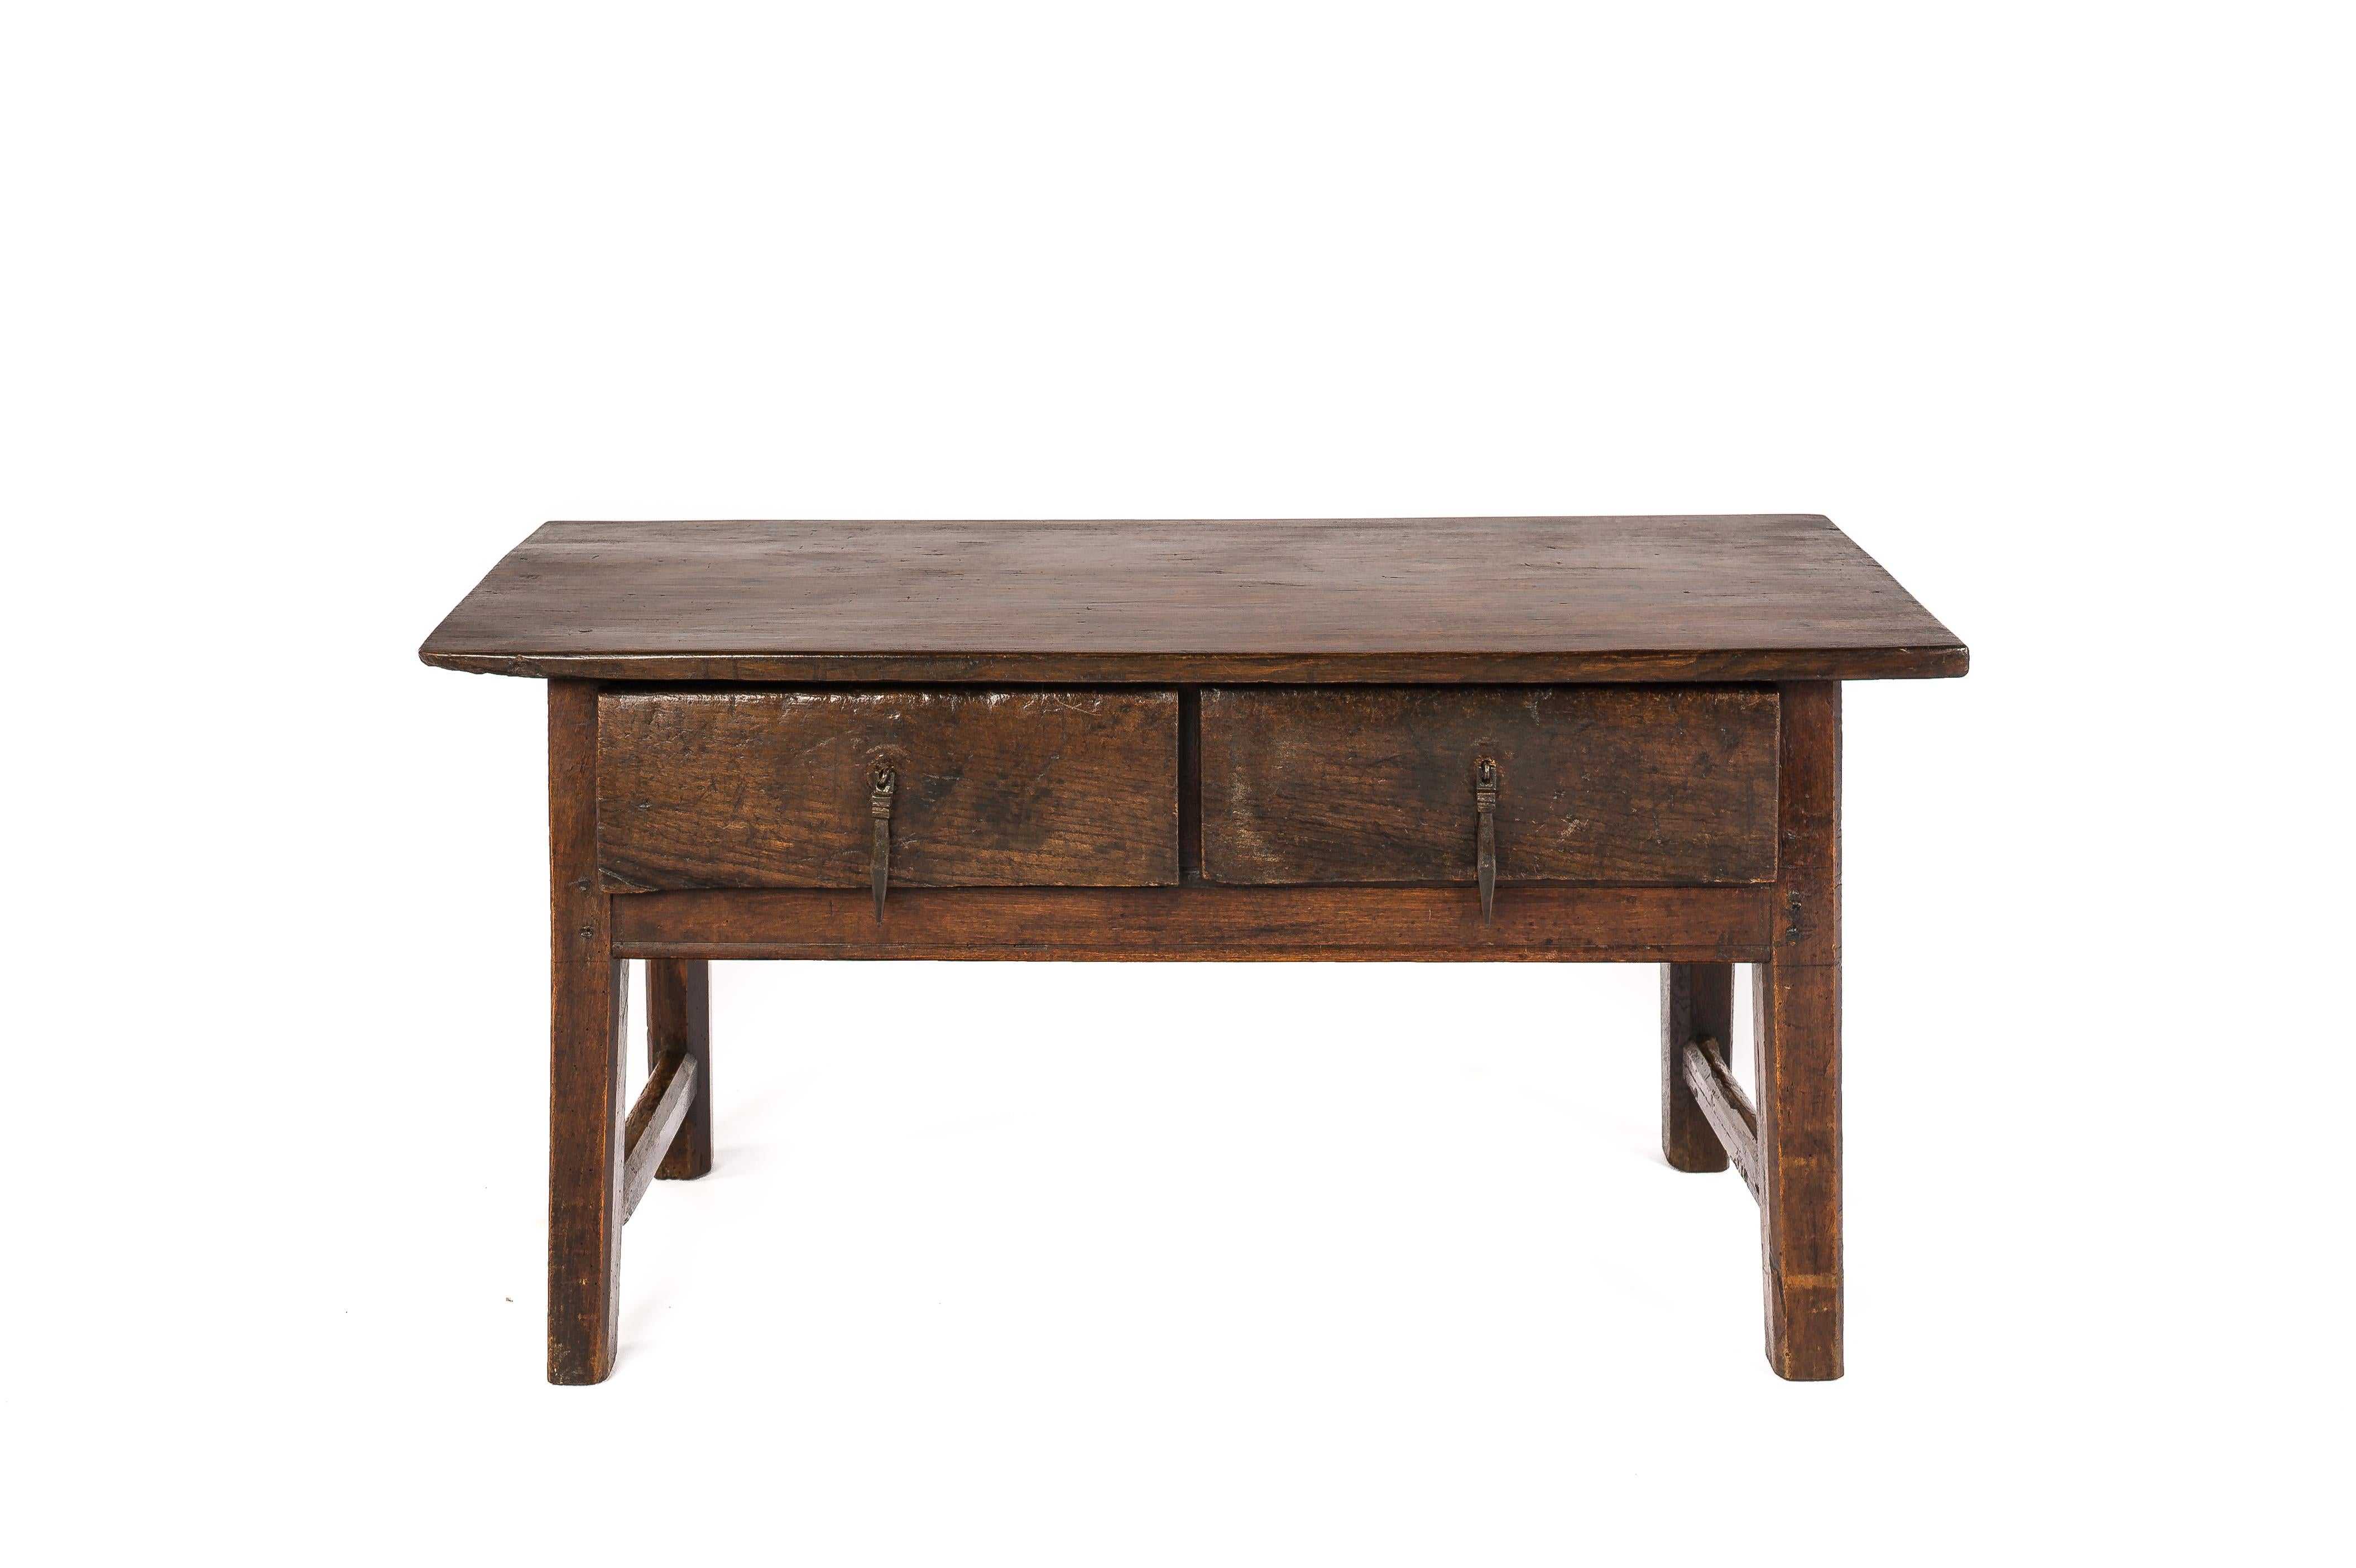 This beautiful table was made in rural Spain in the early 19th century. It was completely traditionally made in solid chestnut. The top was made from a single piece of wood and displays an intricate grain pattern typical for chestnut wood. The top